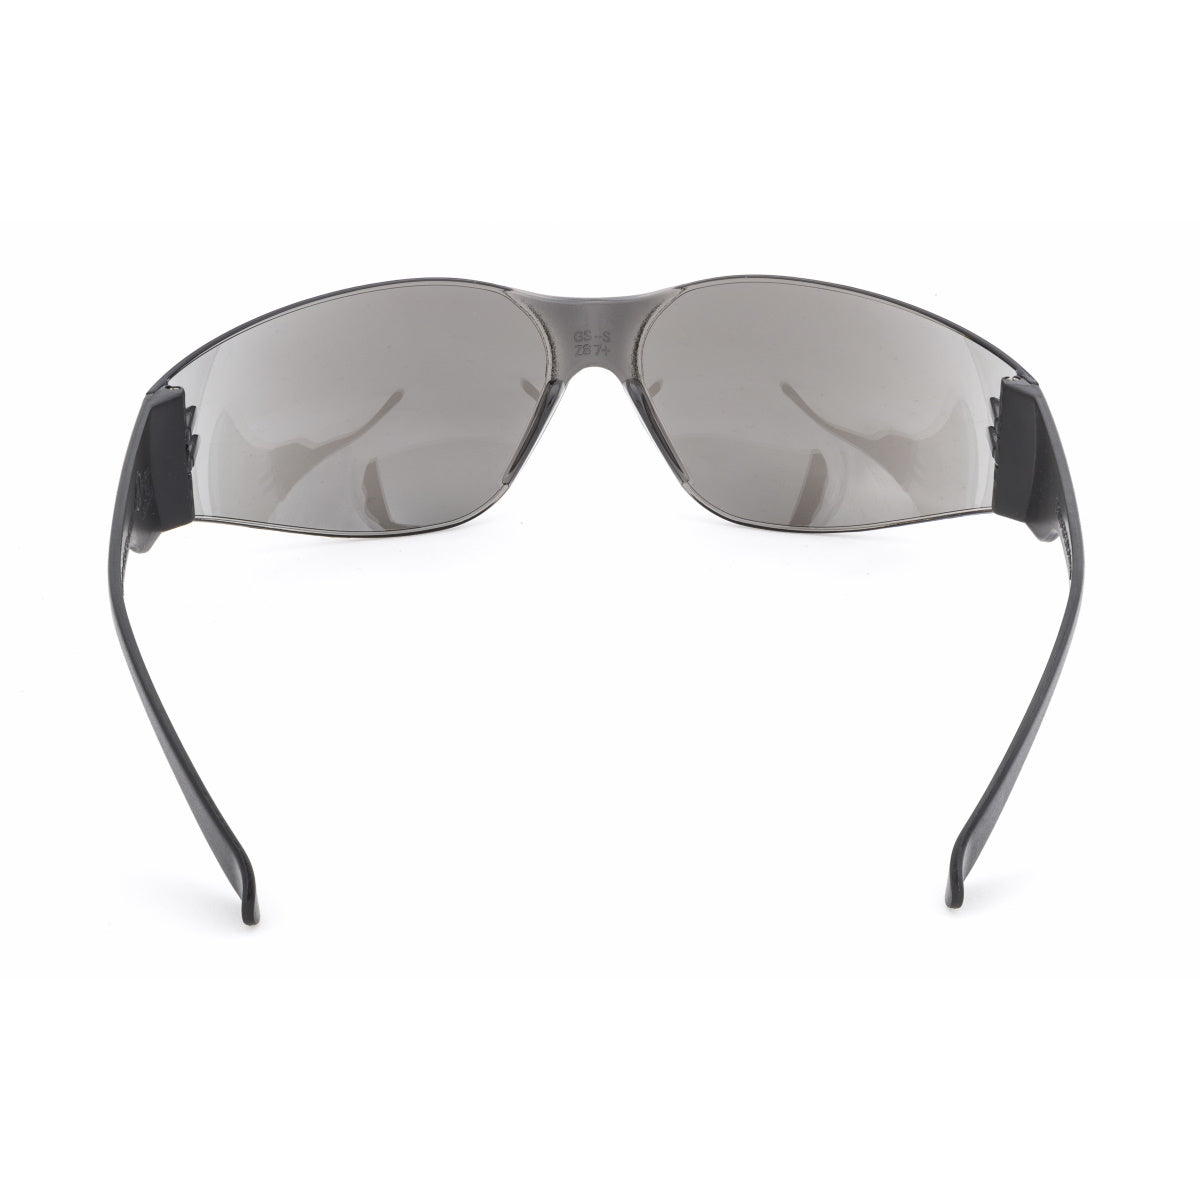 Lincoln Starlite Outdoor Safety Glasses (K2969-1)